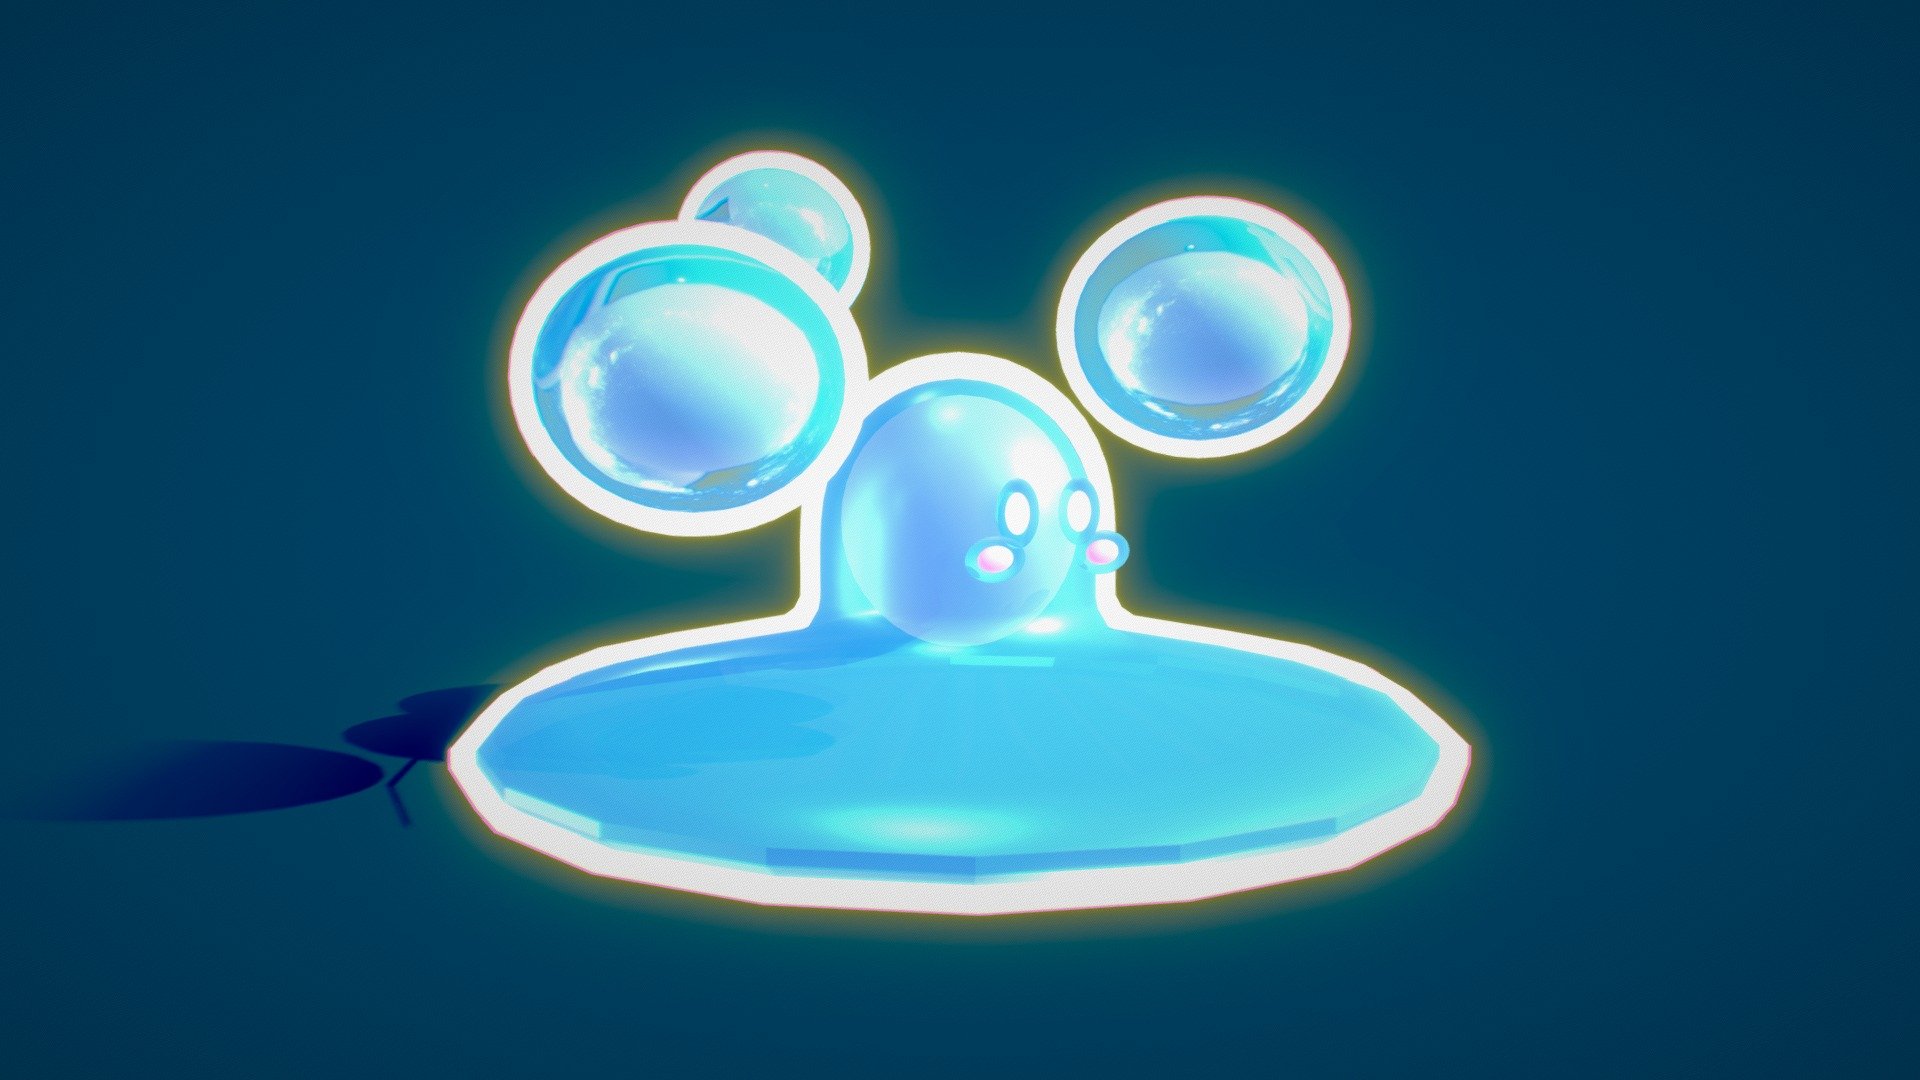 A Little egg shaped slime boy , It's been a while since i 3D modelled so i decided to relearn the basics by making this slime creature 3d model